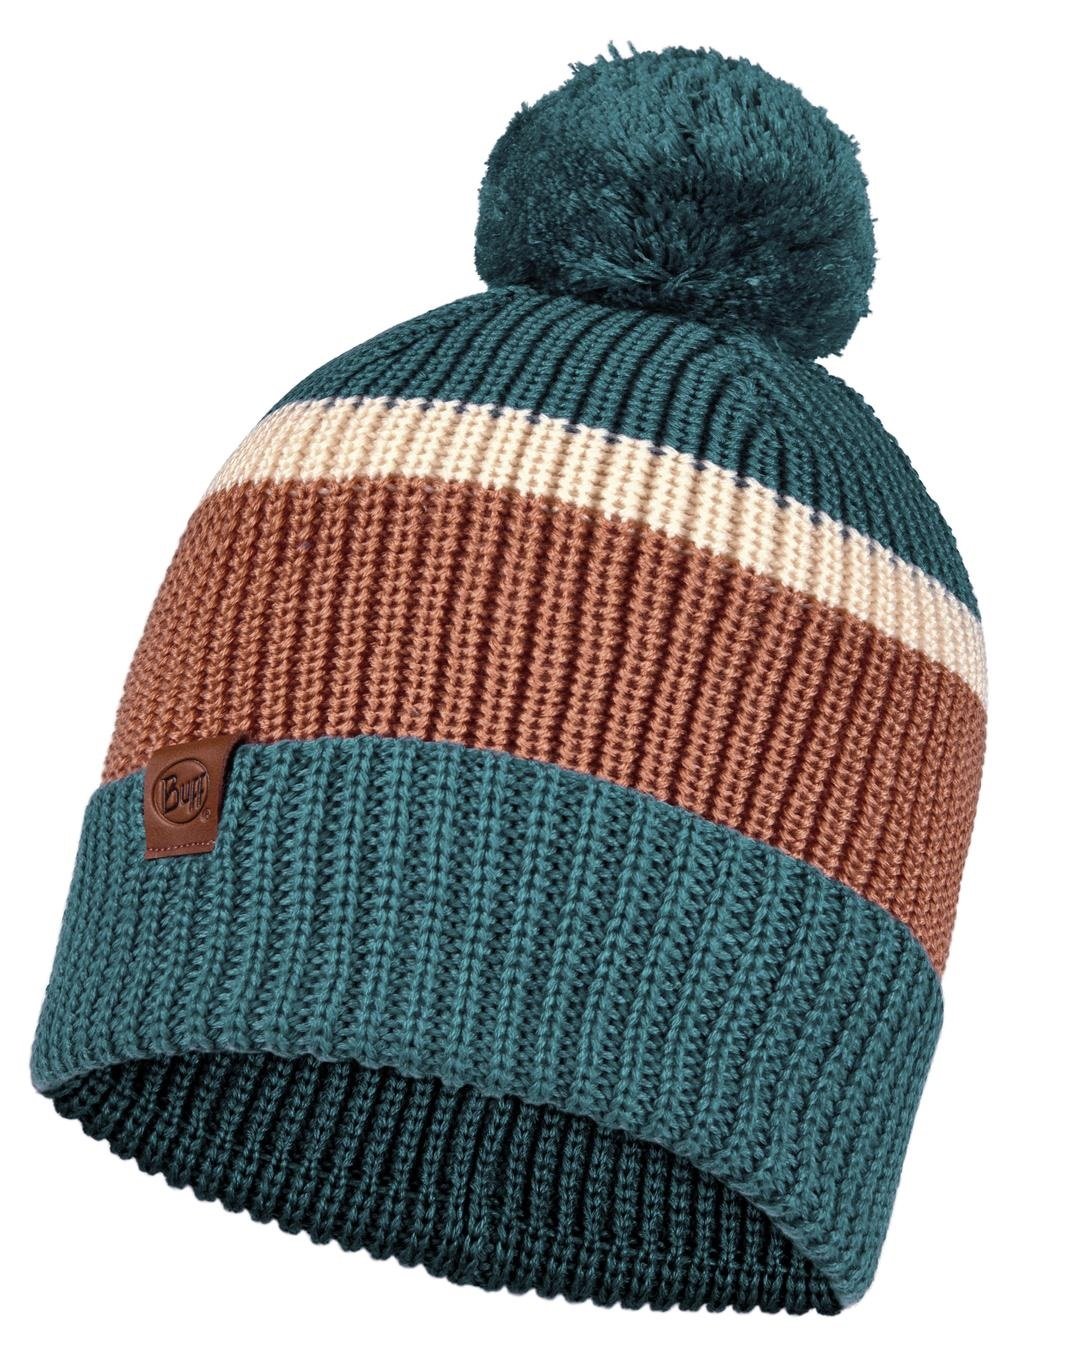 Шапка Buff Knitted Hat Elon Dusty Blue, US:One size, 126464.742.10.00 шапка buff knitted hat nilah nilah ice us one size 132322 798 10 00